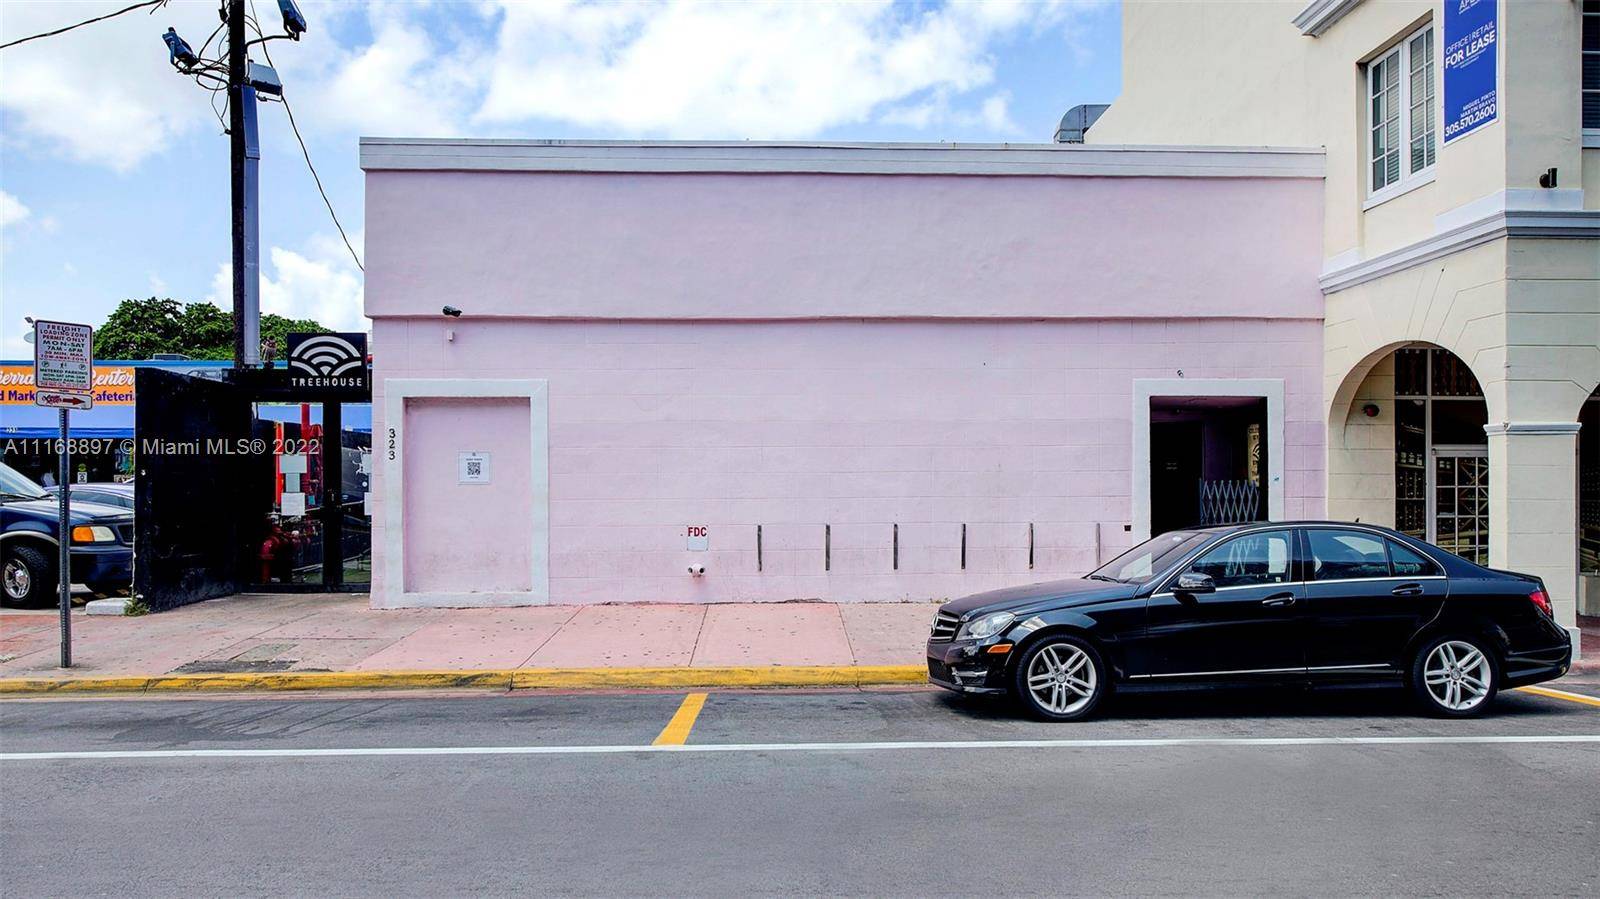 An opportunity to acquire 323 23 Street, one of Miami Beach s most popular long standing techno nightclubs in an elite location.